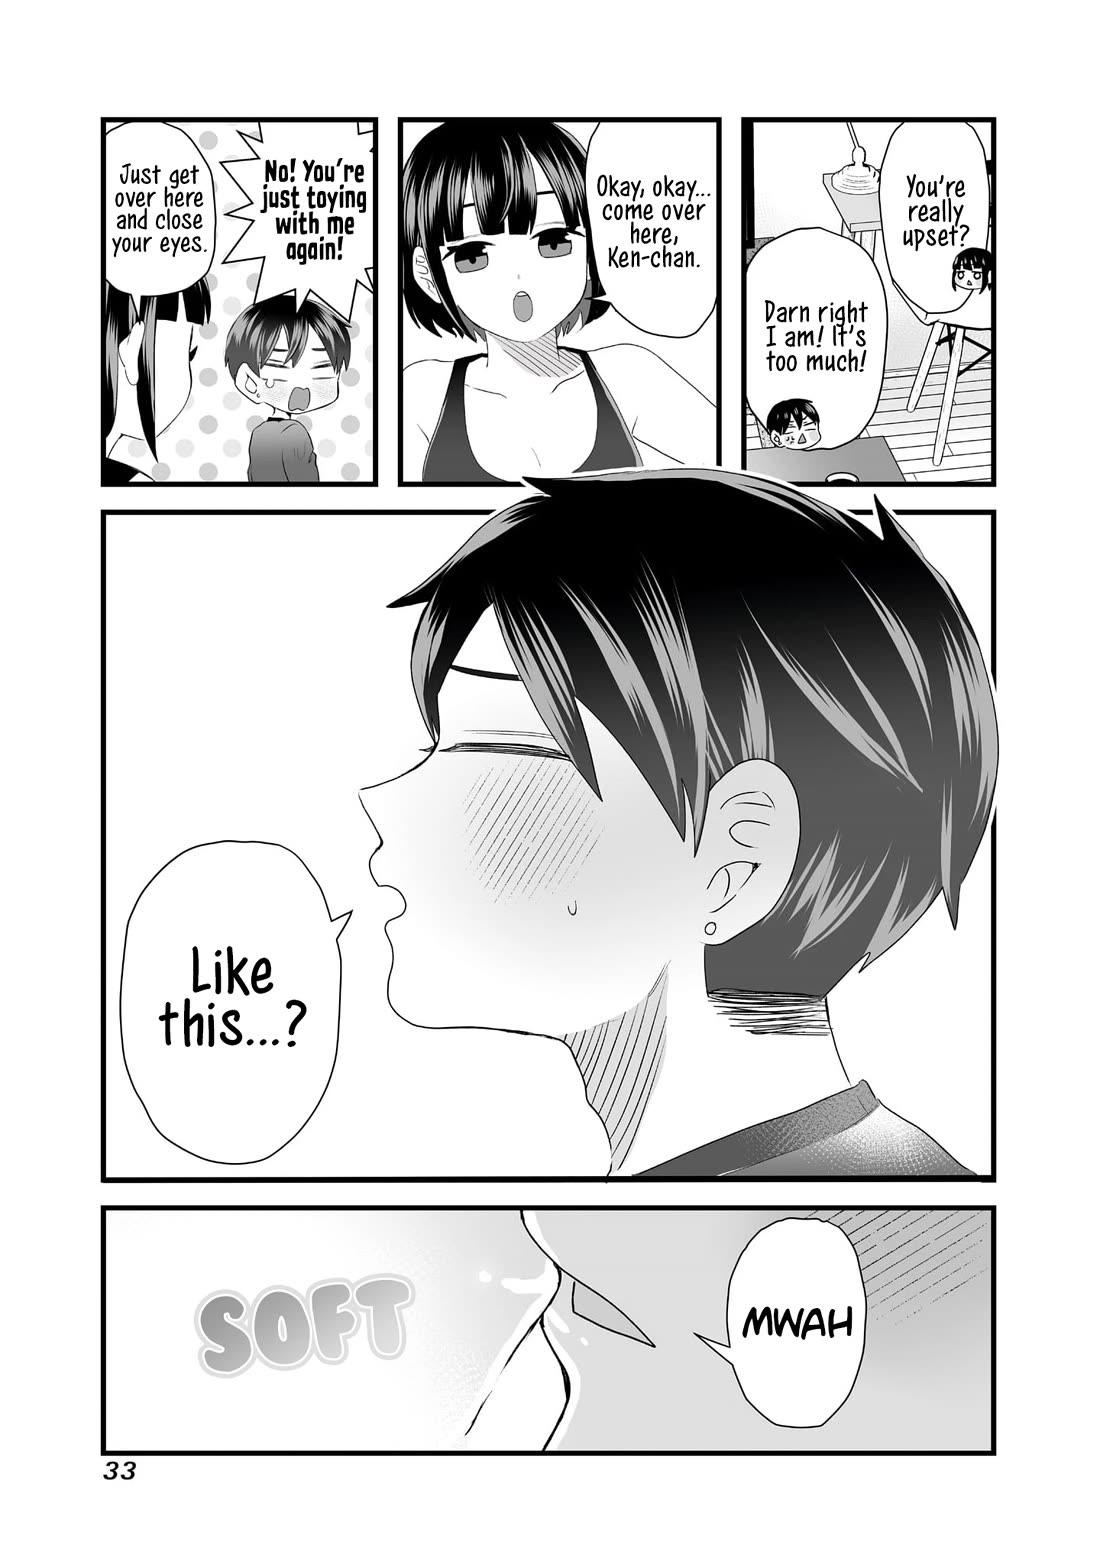 Sacchan and Ken-chan Are Going at it Again - chapter 4 - #5